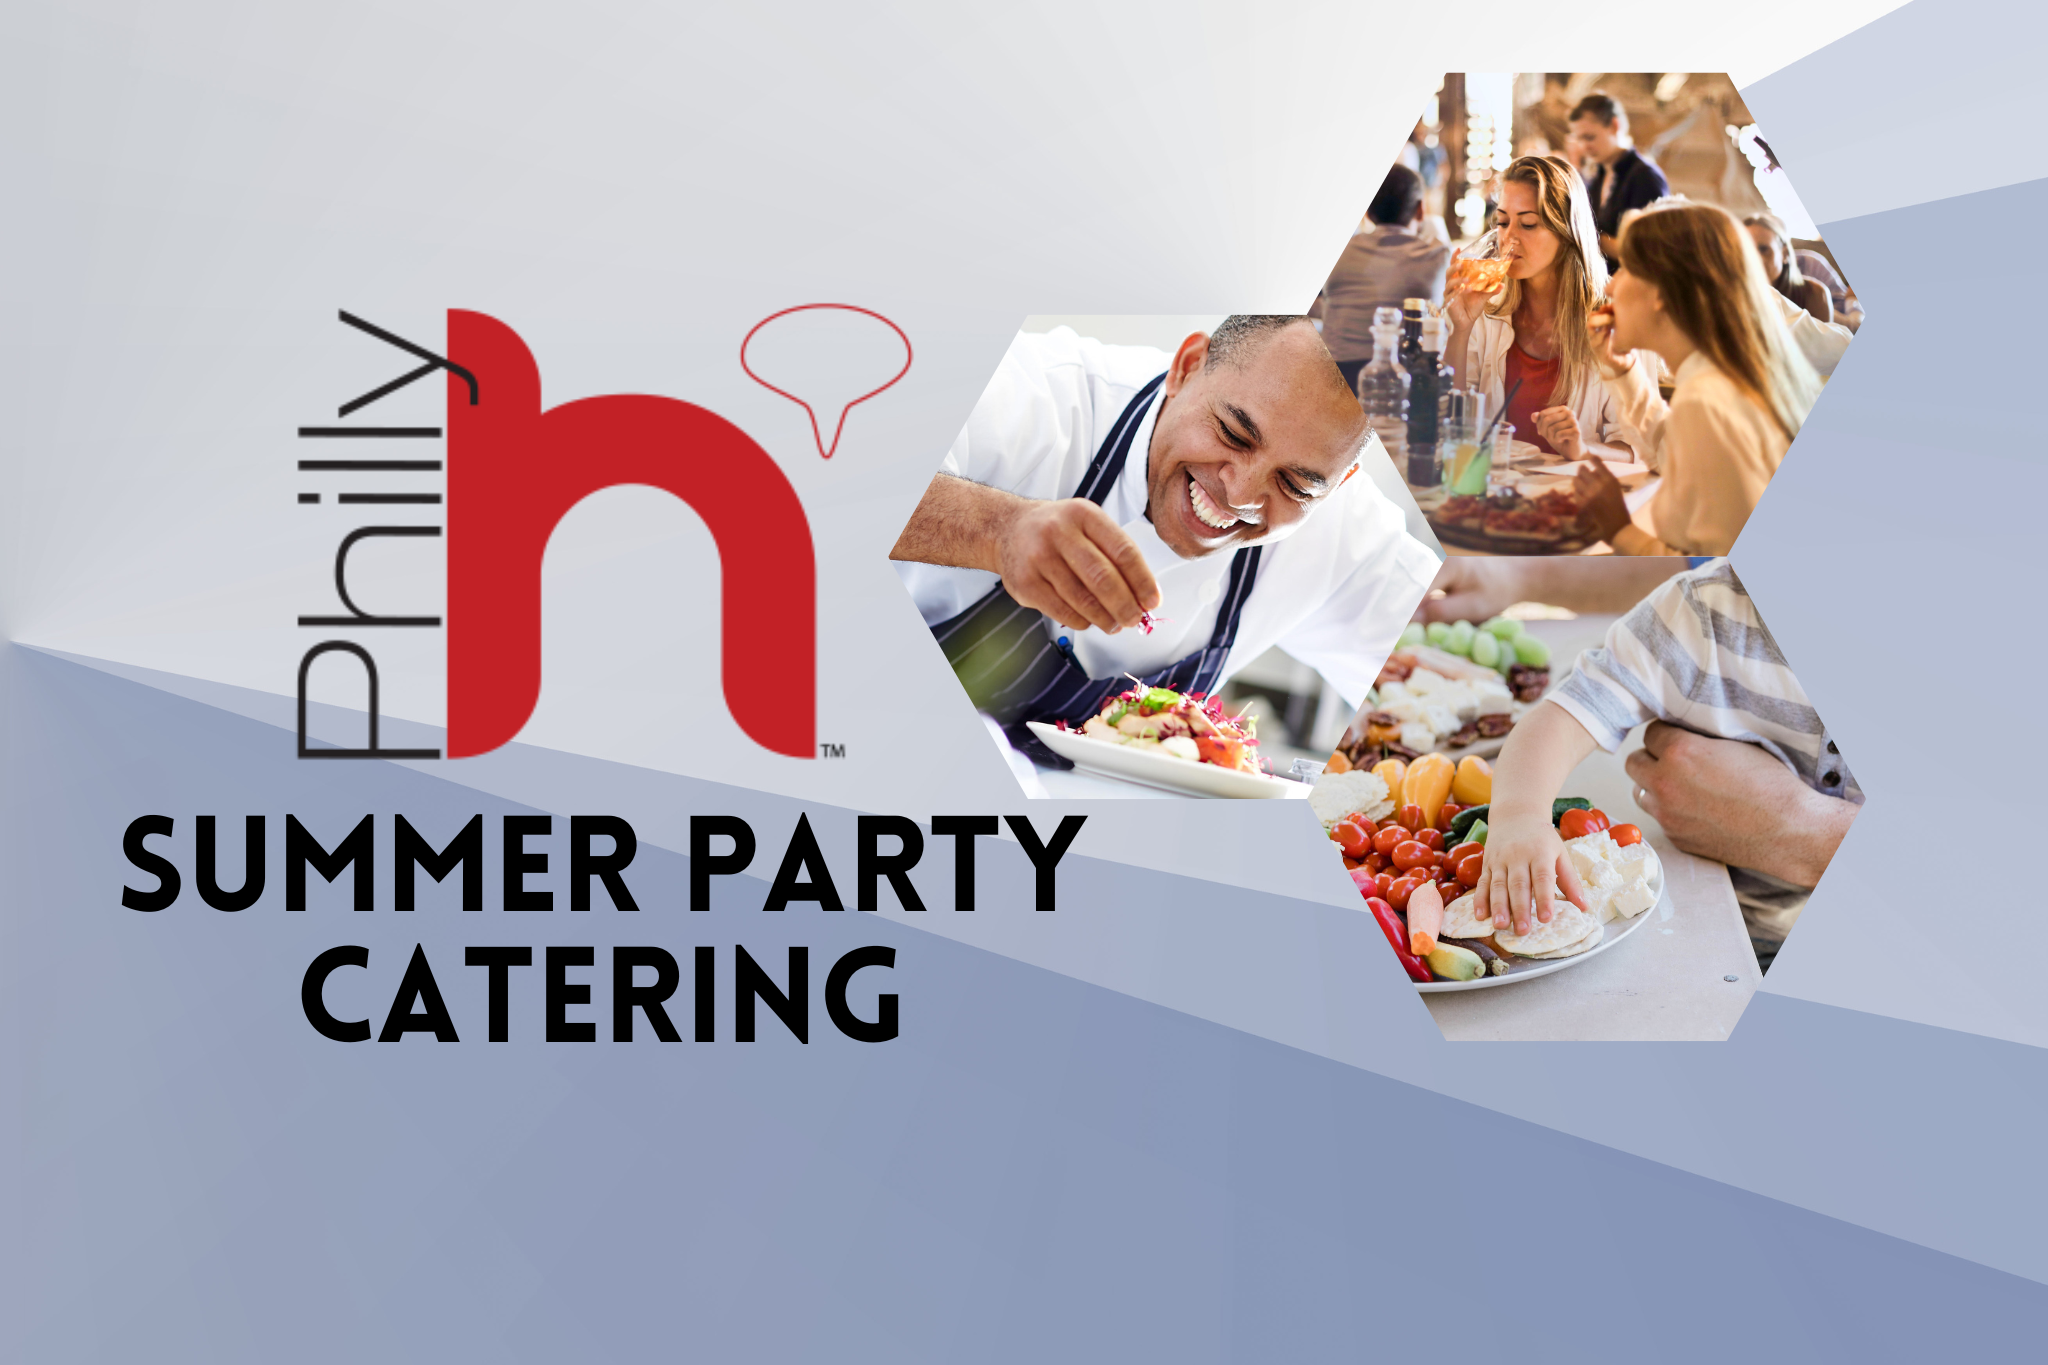 Summer Party Catering